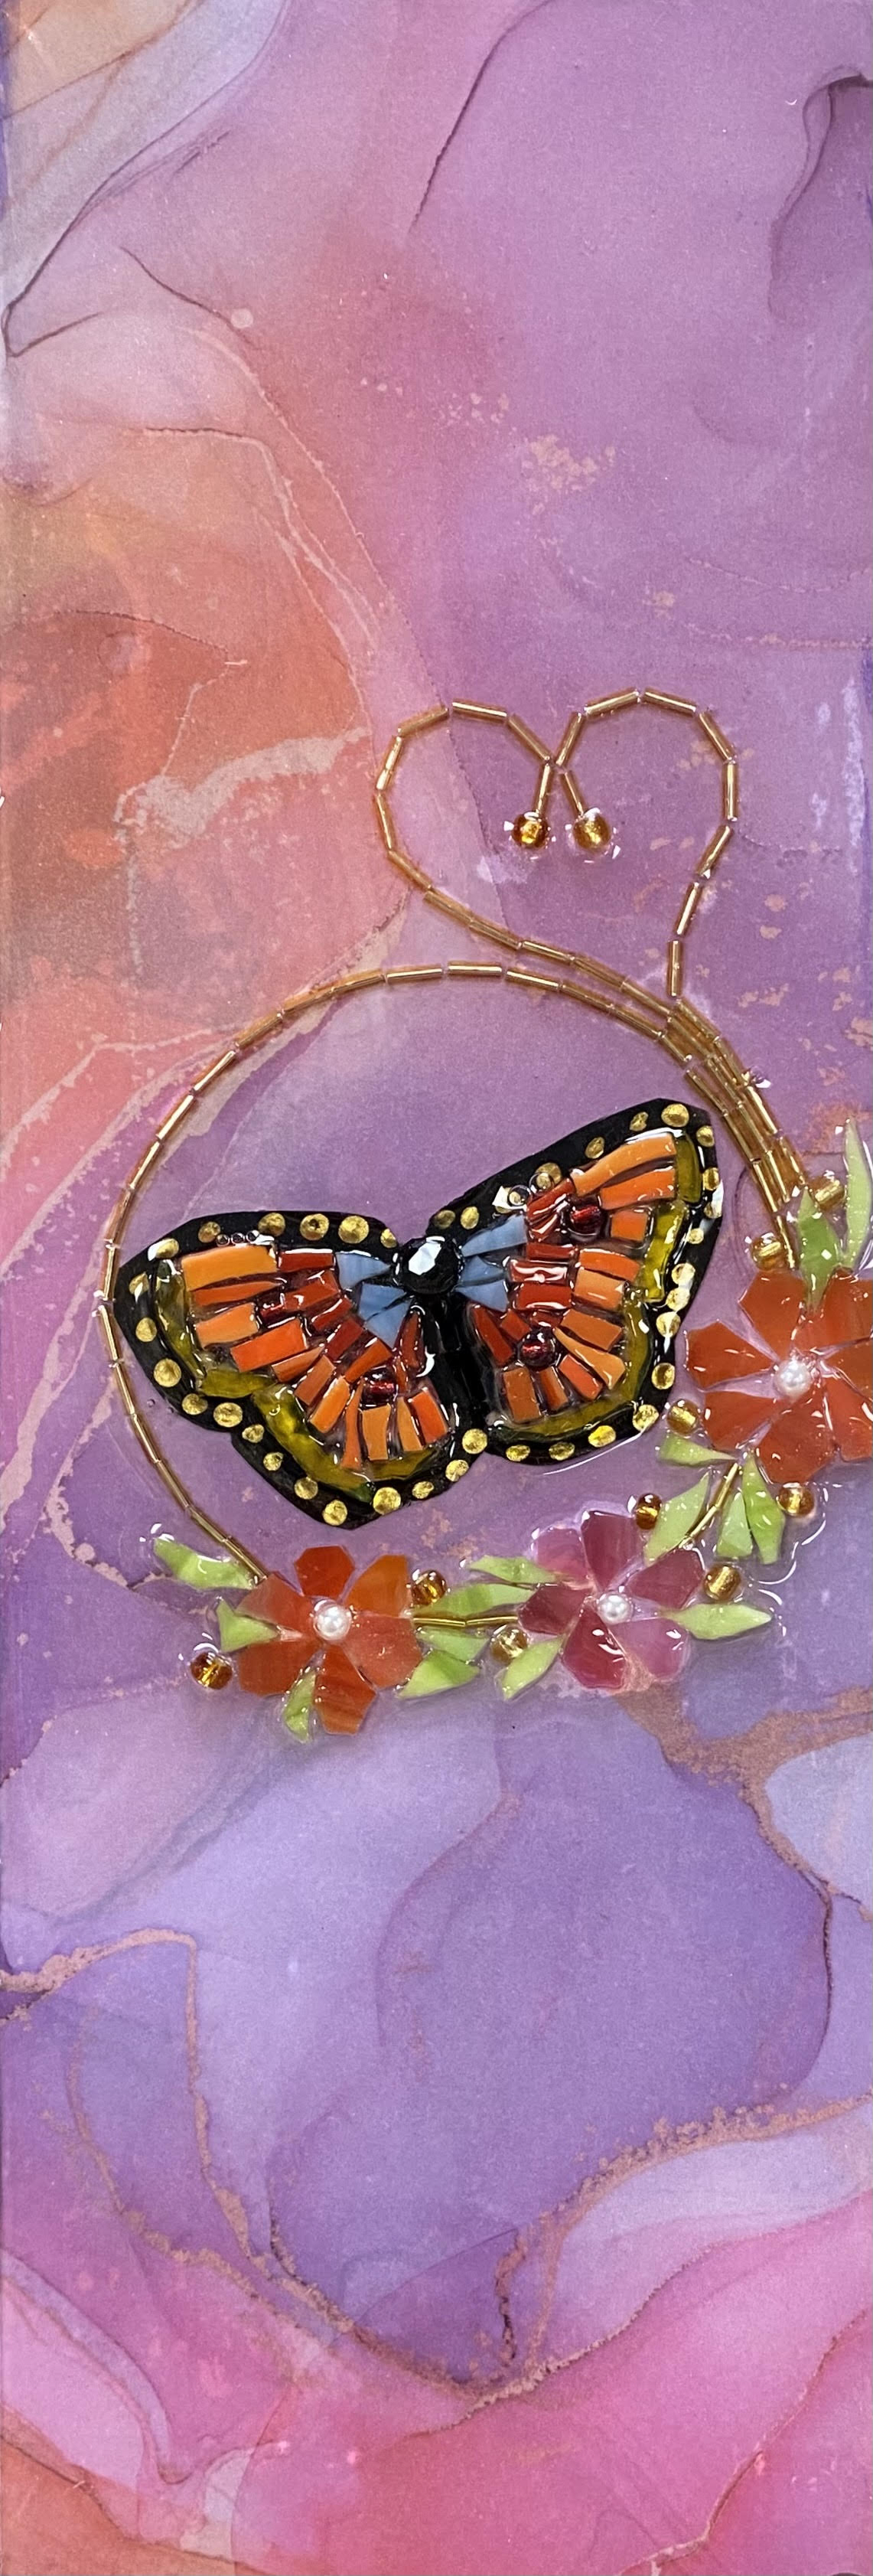 Amy Hahn's Butterfly